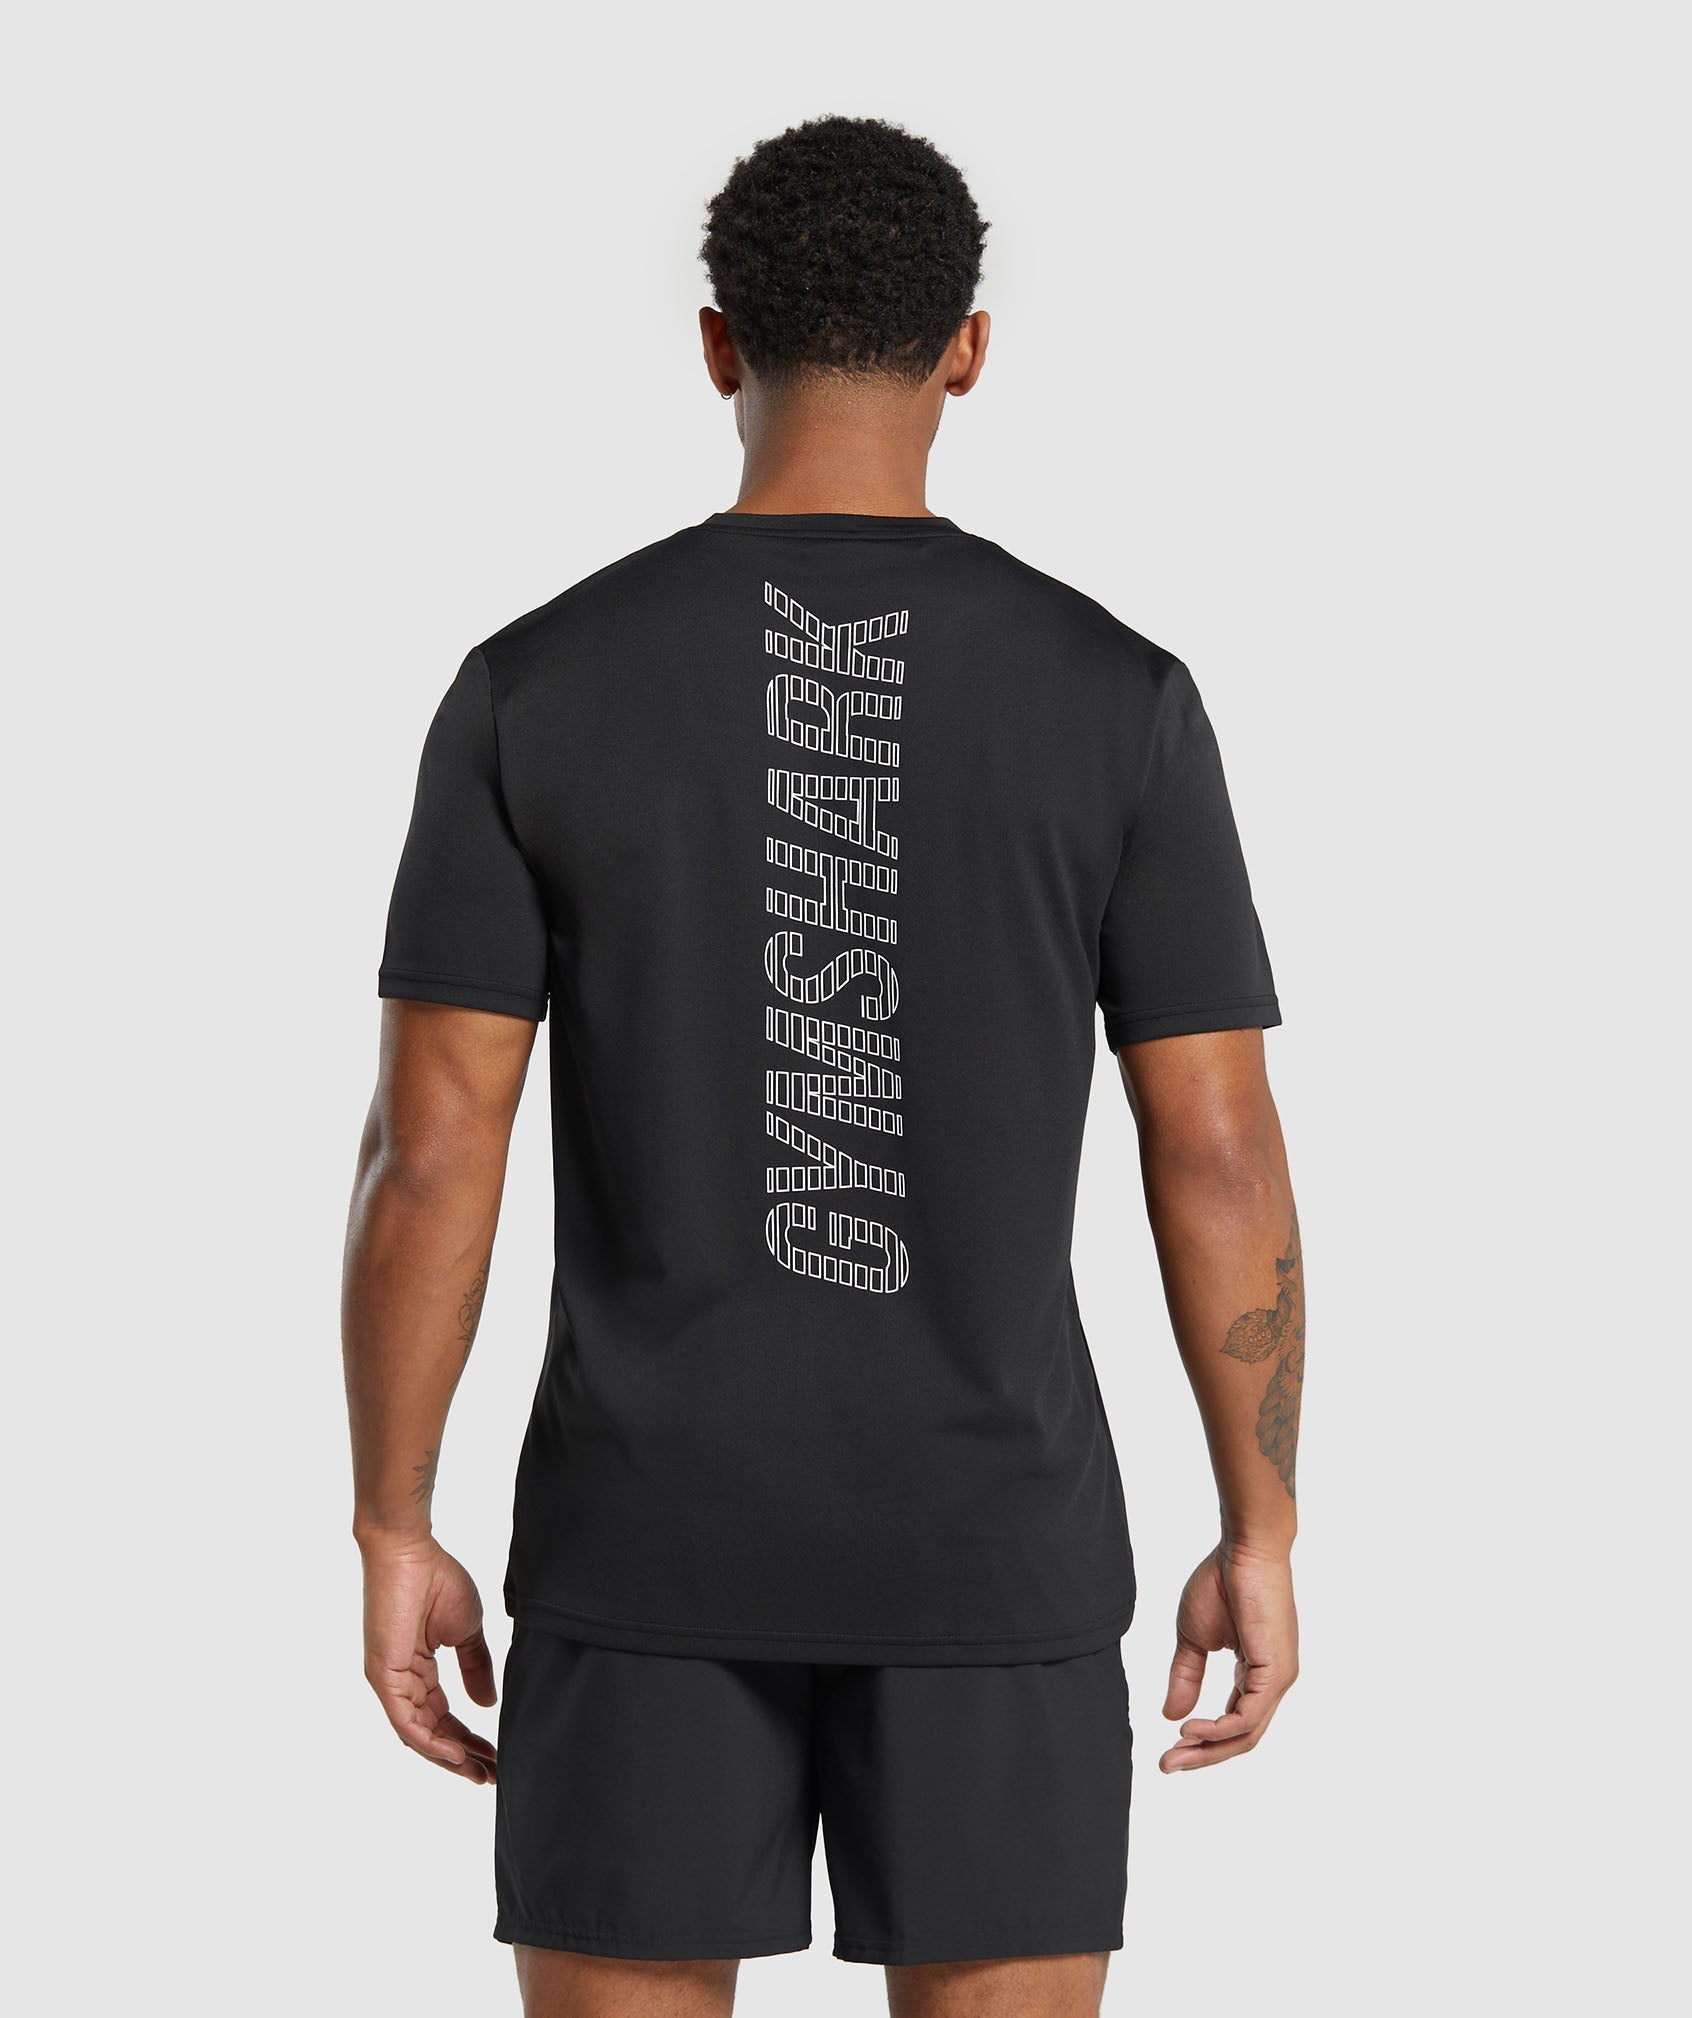 Conditioning Goods T-Shirt